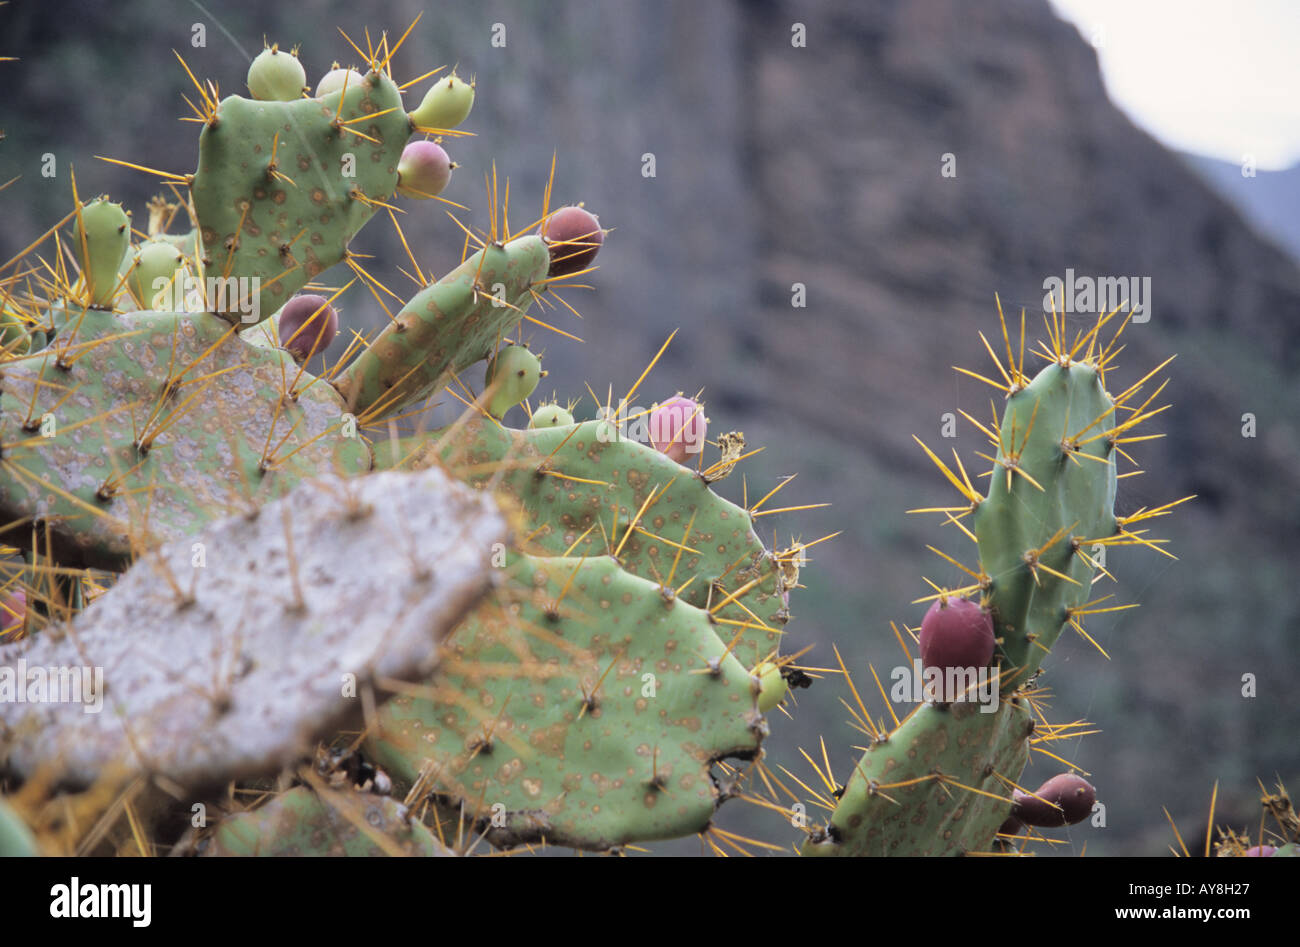 Fruits and spines of Prickly Pears Opuntia dillenii in Tenerife Canary Islands Spain Stock Photo